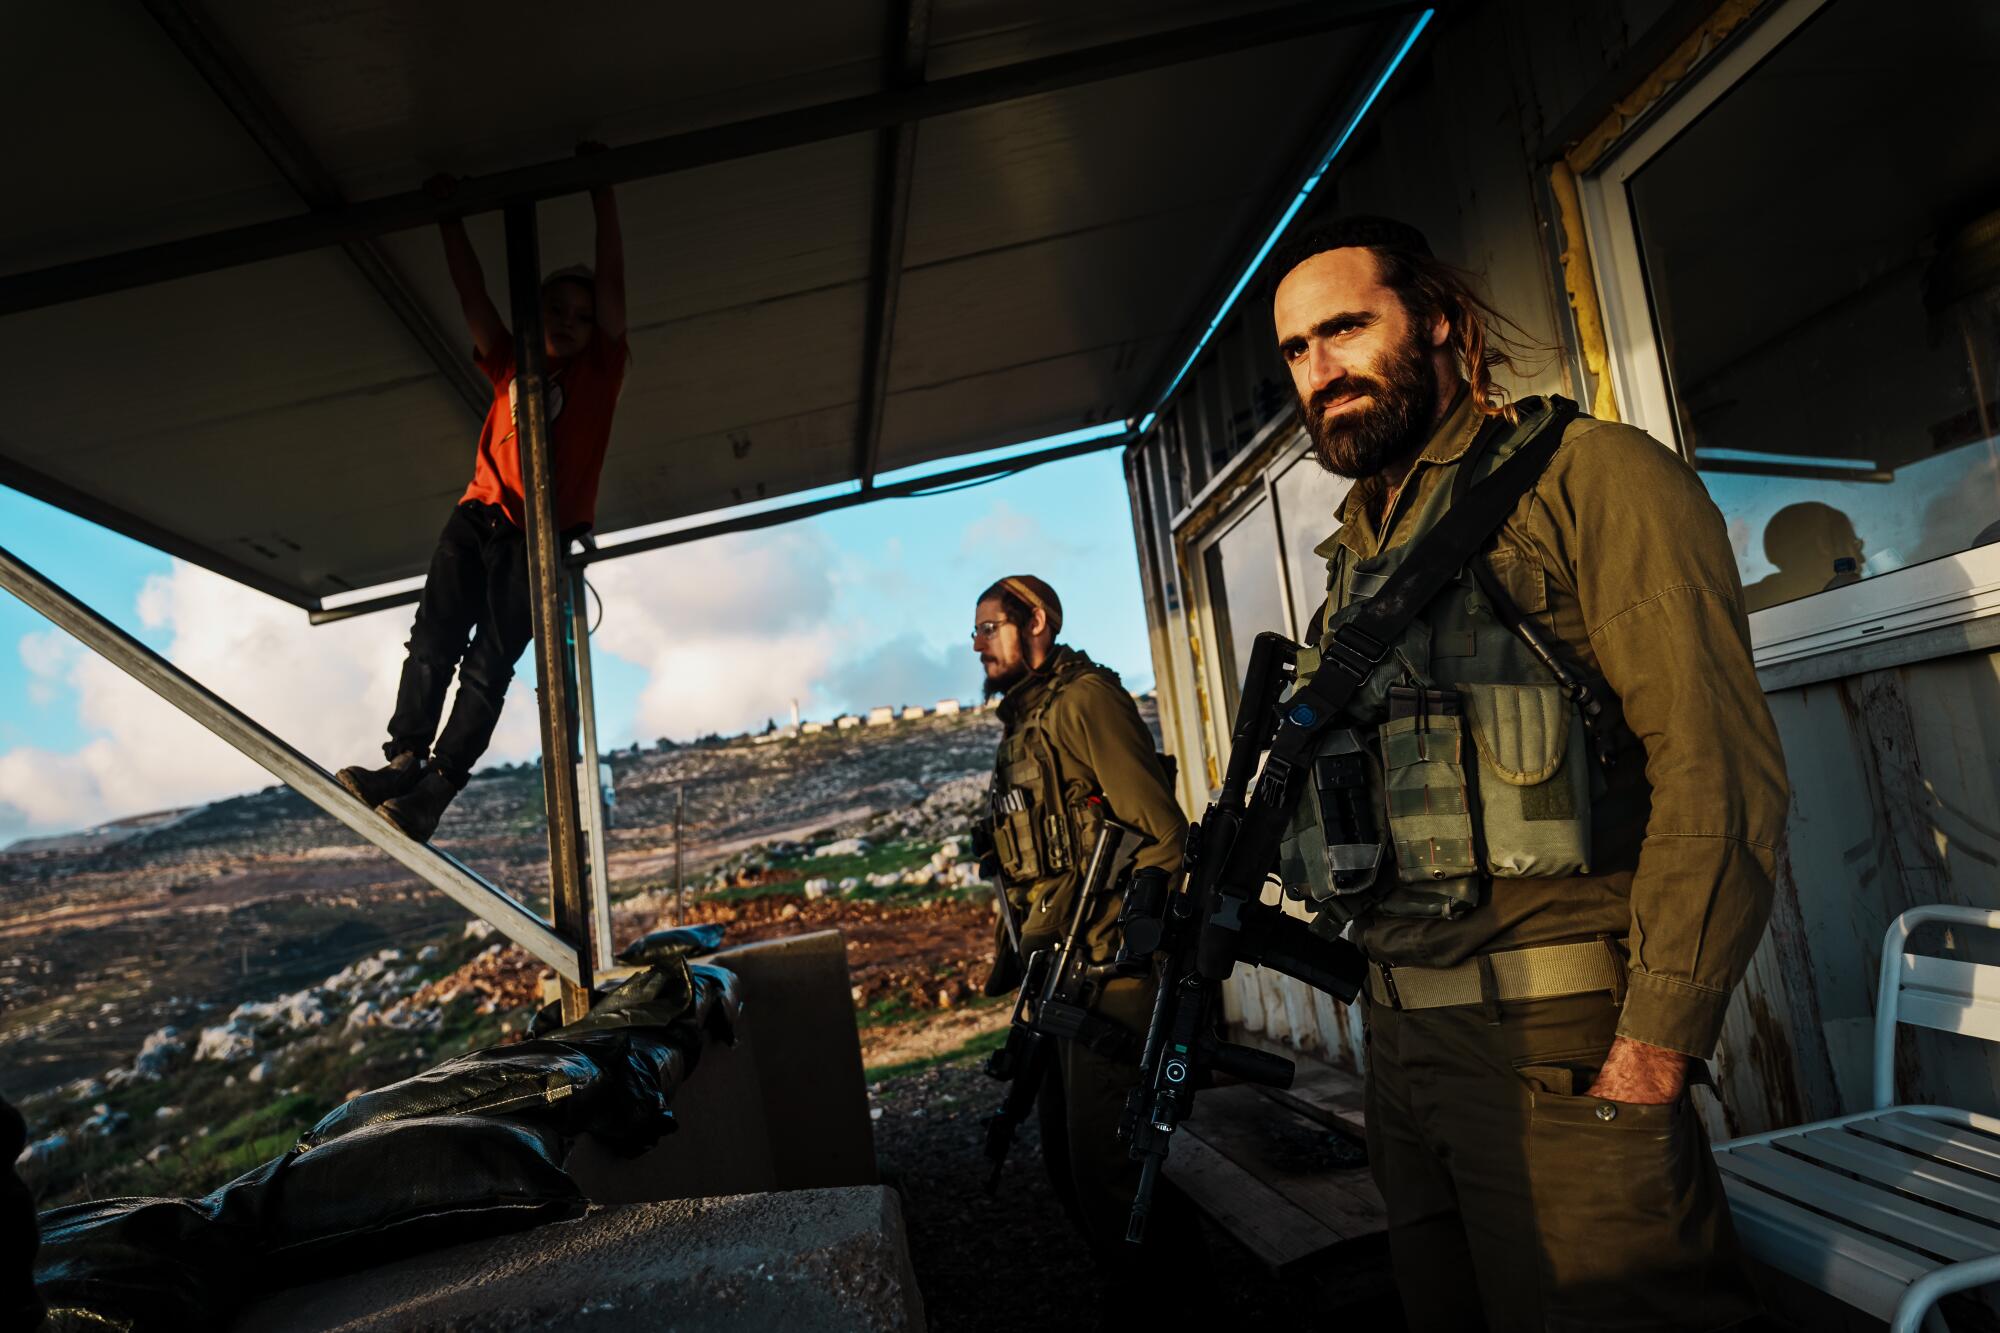 Three soldiers, one propped up on a roof brace, outside a small building, gazing down on communities in the valley below